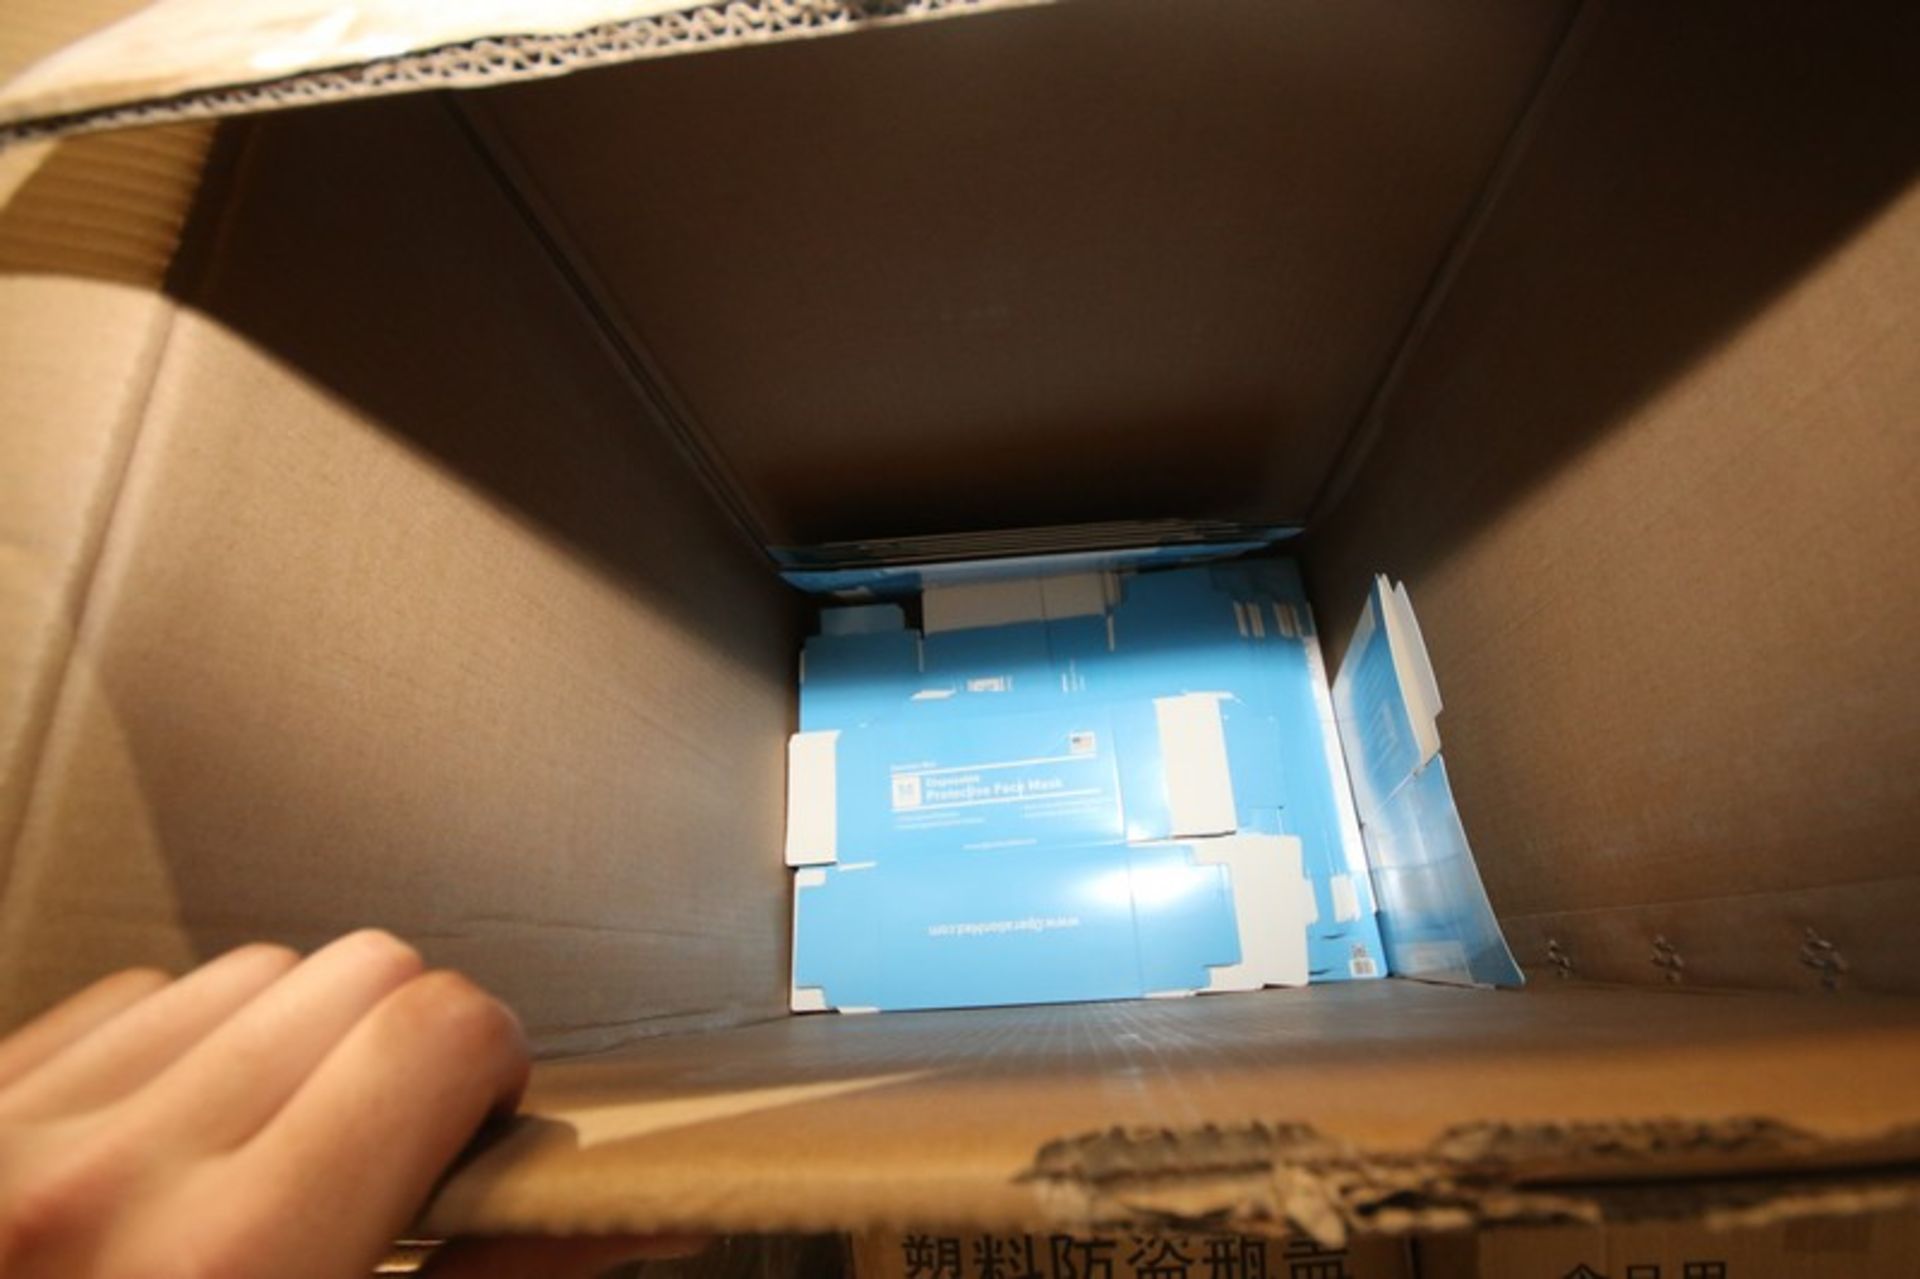 NEW Boxes of Disposible Boxes, Aprox. (17) Boxes (LOCATED IN LAS VEGAS NV) - Image 3 of 3